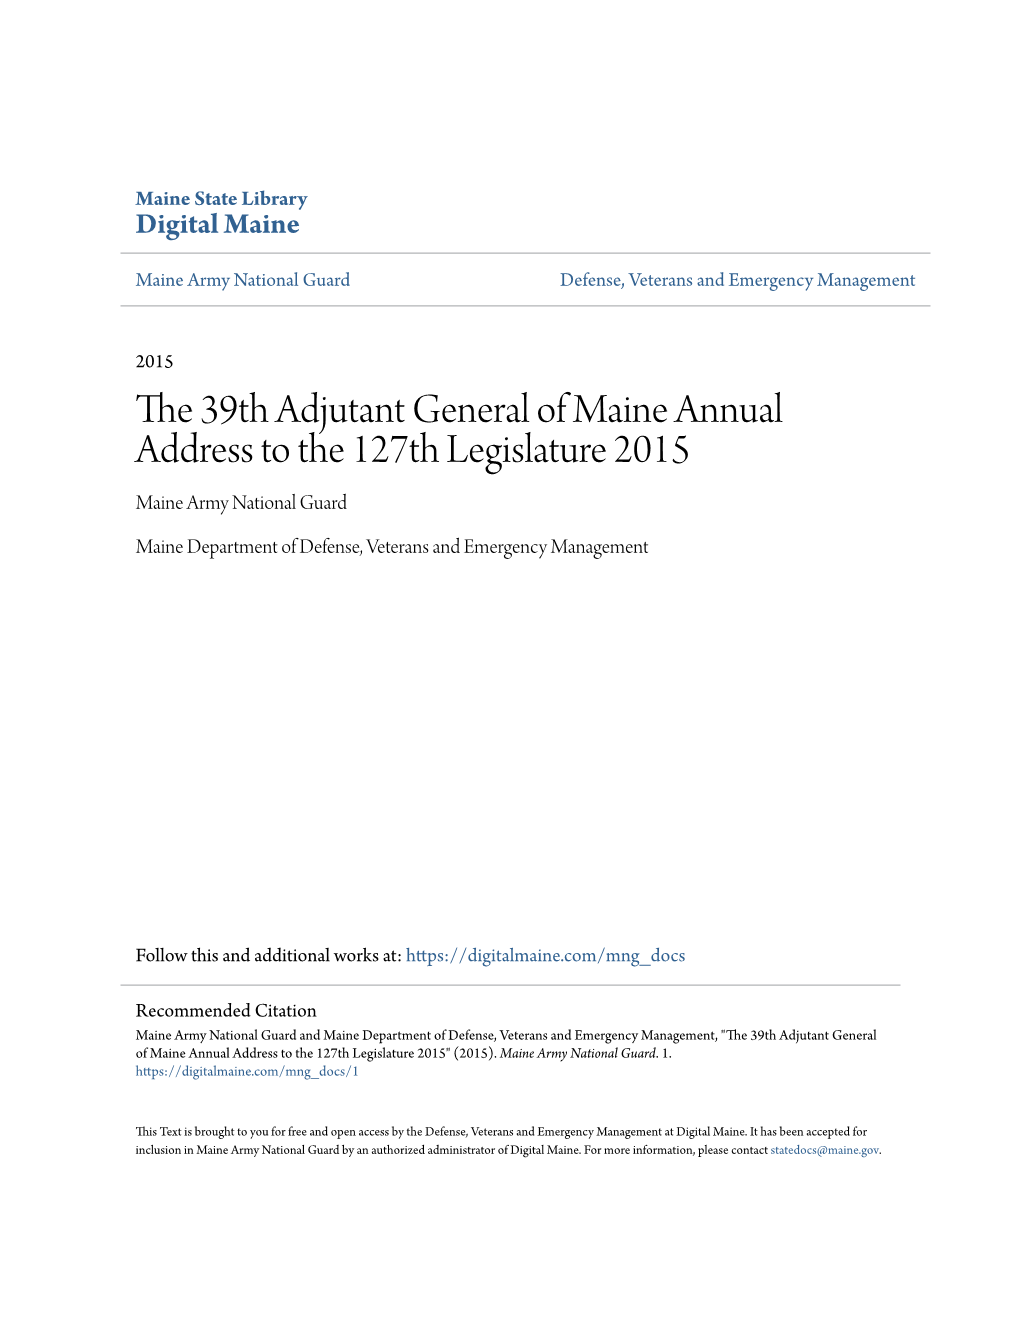 The 39Th Adjutant General of Maine Annual Address to the 127Th Legislature 2015 Maine Army National Guard